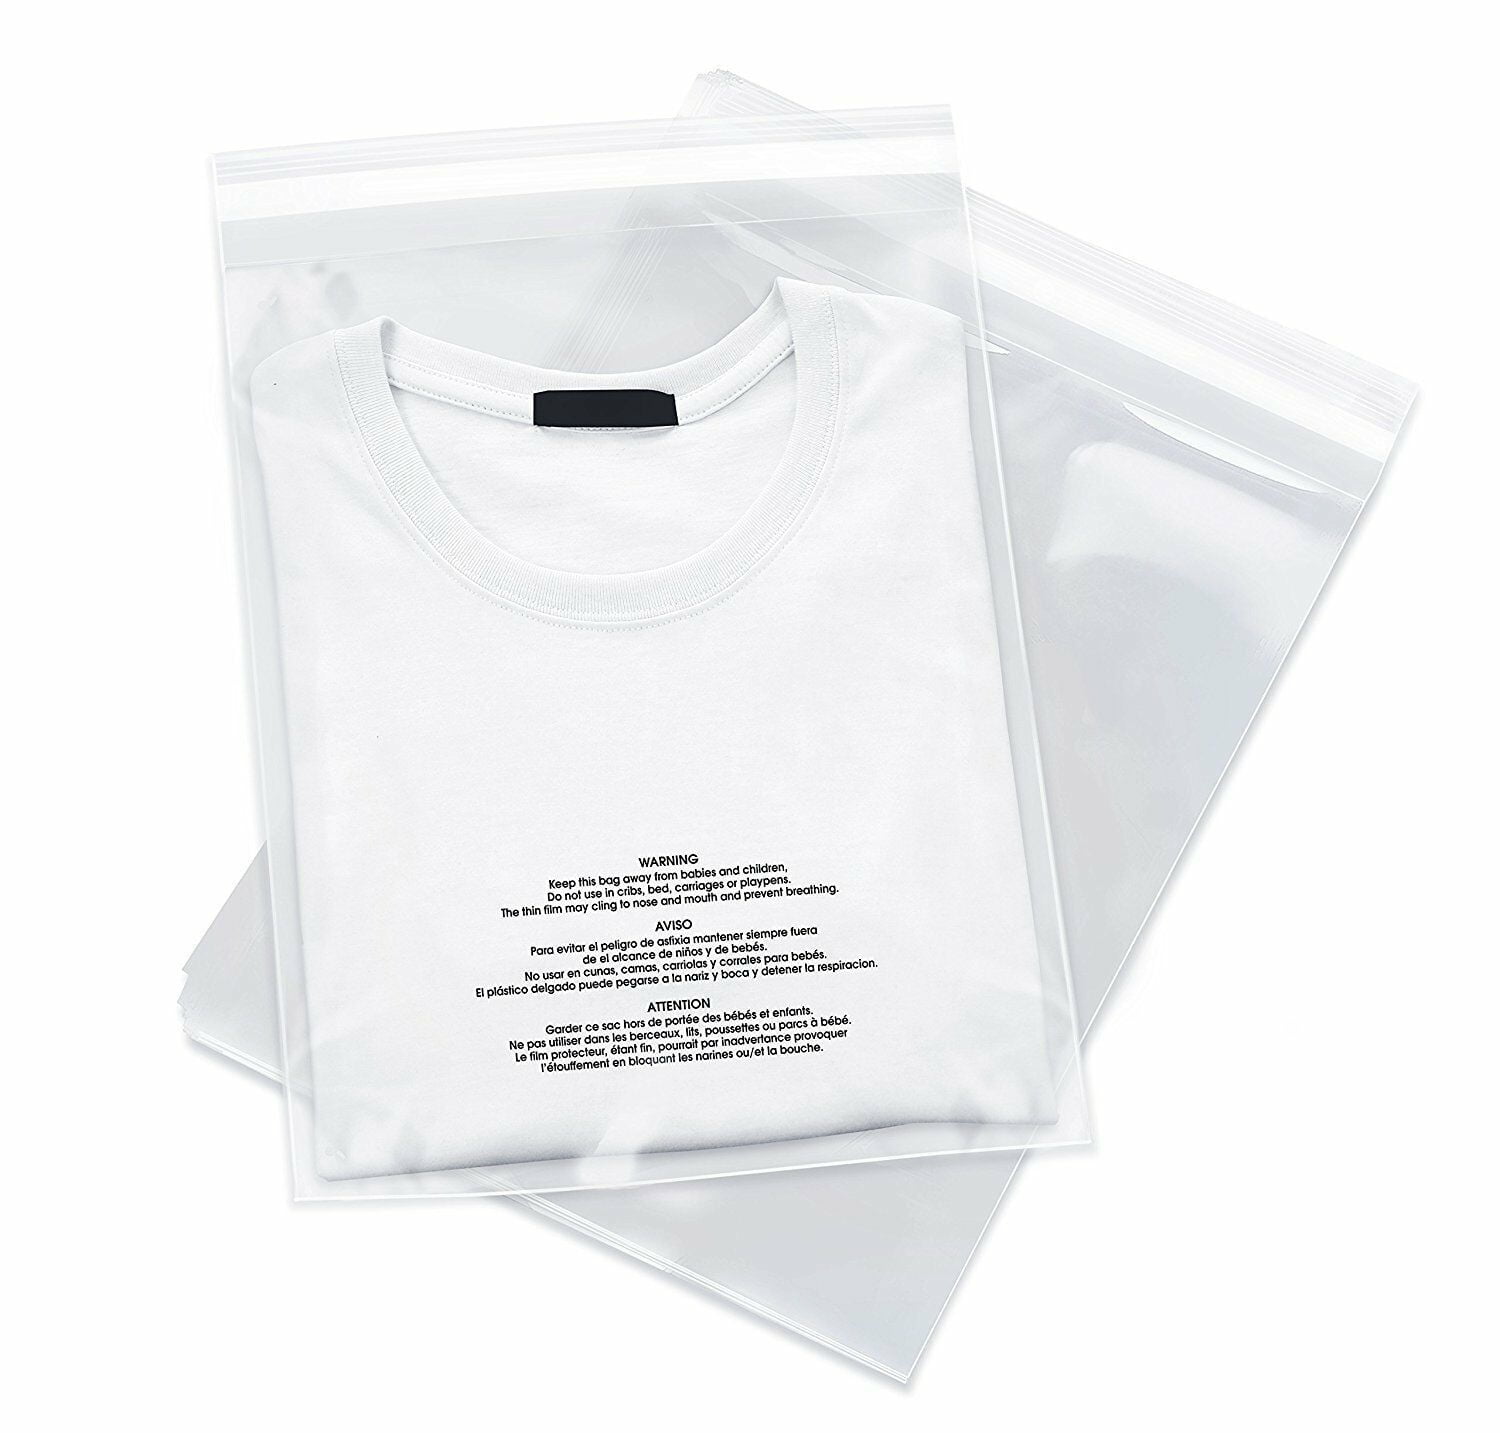 1.5 Mil GPI PACK of 500 9 x 12 CLEAR SELF SEAL POLY BAGS Resealable Polybags With Adhesive strip & Suffocation Warning For Packaging T Shirts Clothing Perfect for Shipping Supplies With FBA 